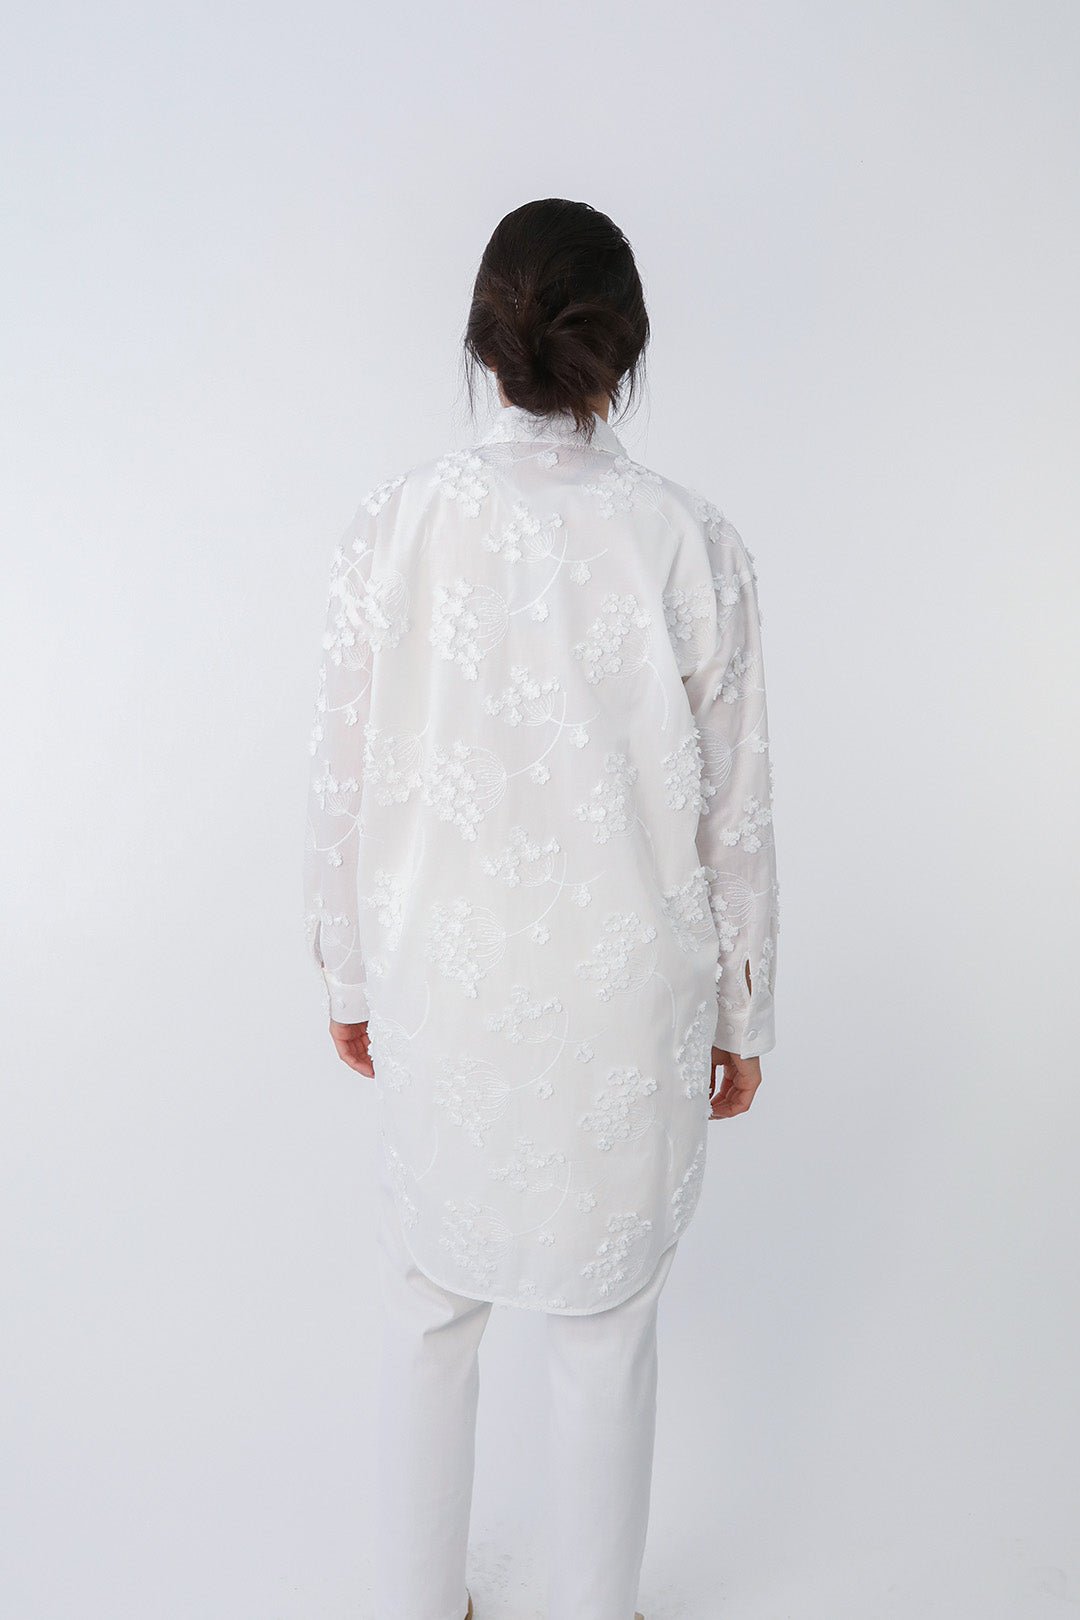 QUEEN ANNE EMBROIDERED LAYERED TUNIC SHIRT IN ITALIAN COTTON - Jarbo